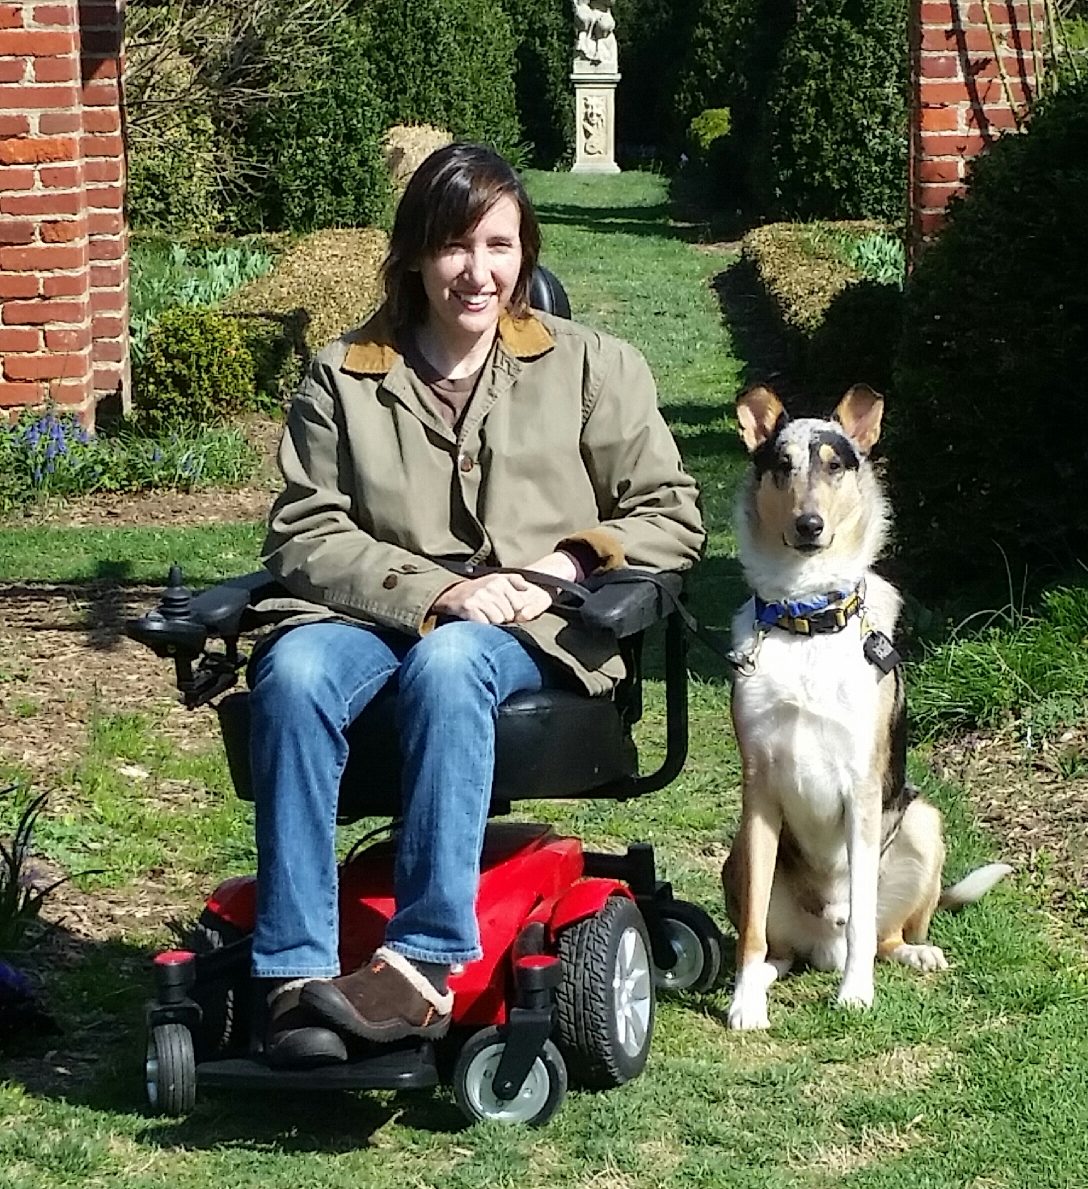 Dog trainer in wheelchair with dog